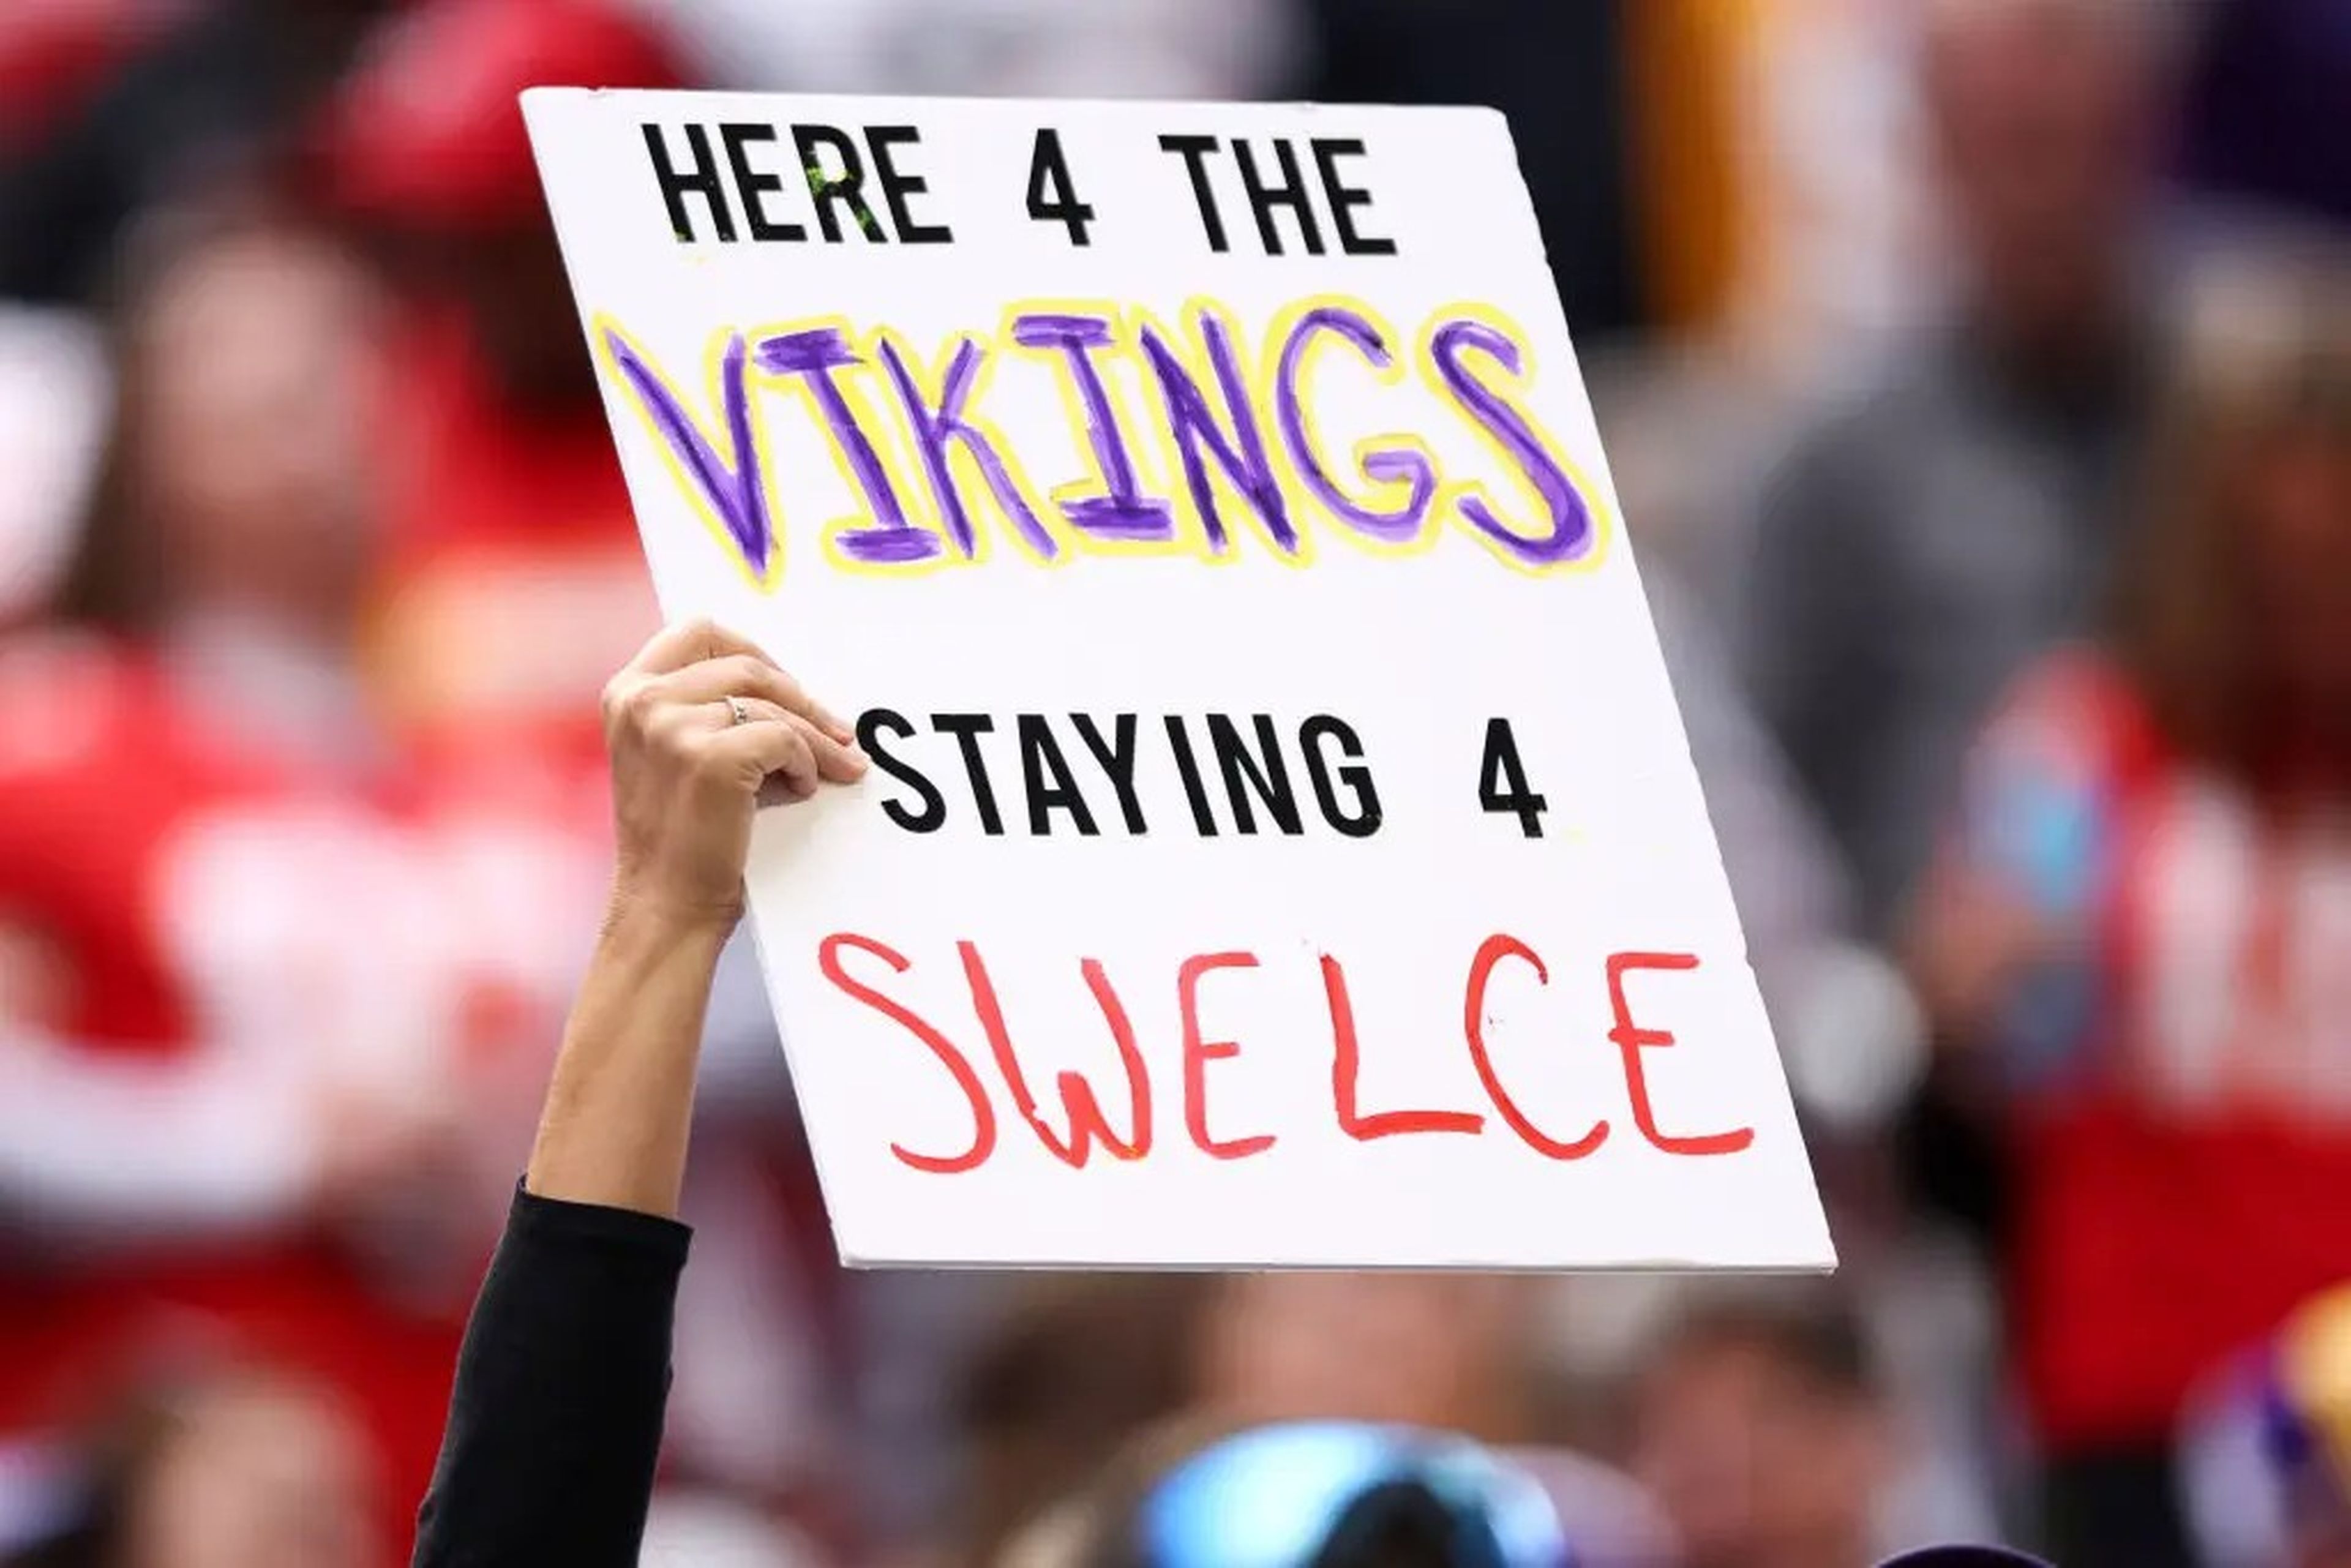 A fan holding up a "Swelce" sign at a football game.